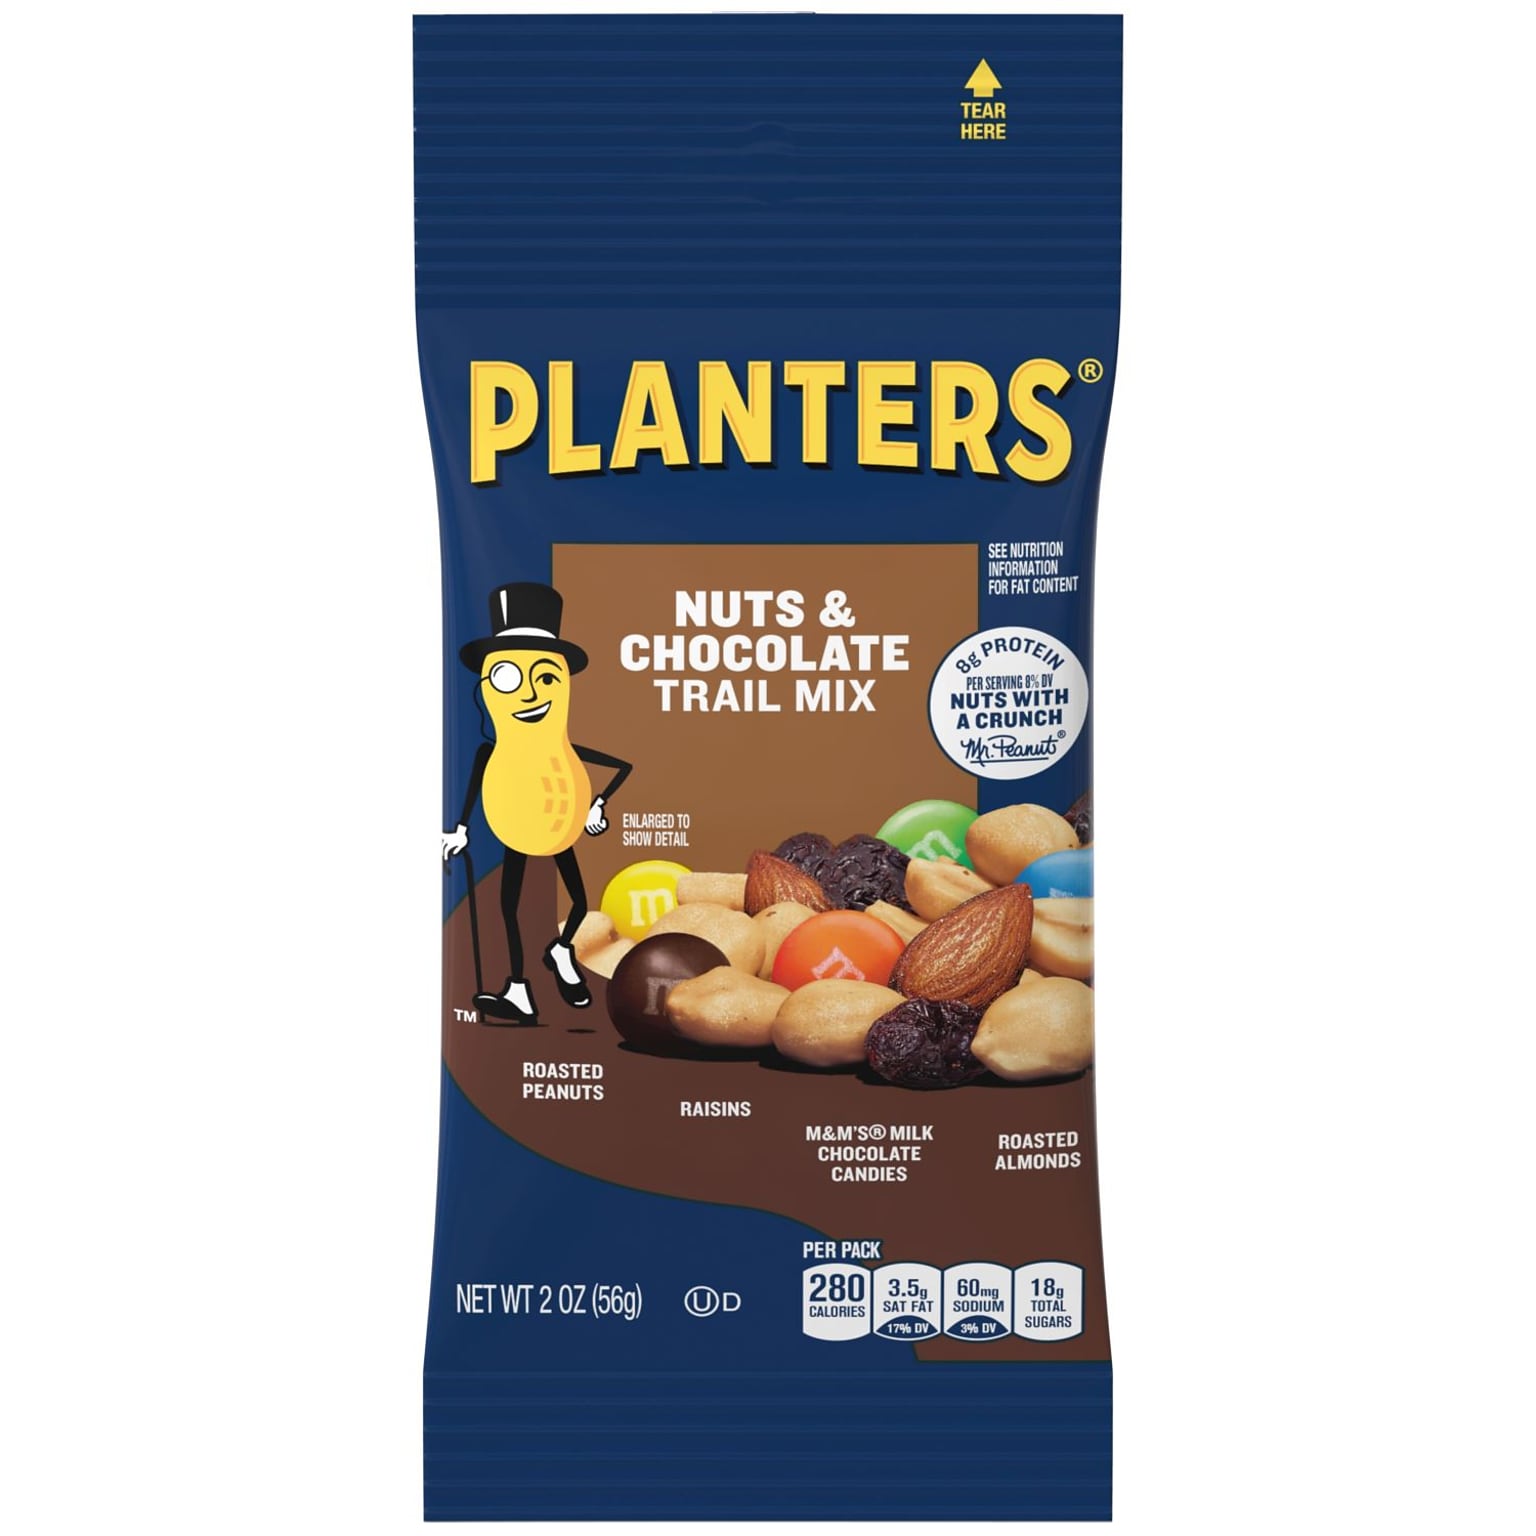 Planters Nuts & Chocolate Trail Mix, 2 oz., 72 Bags/Pack (GEN00270)